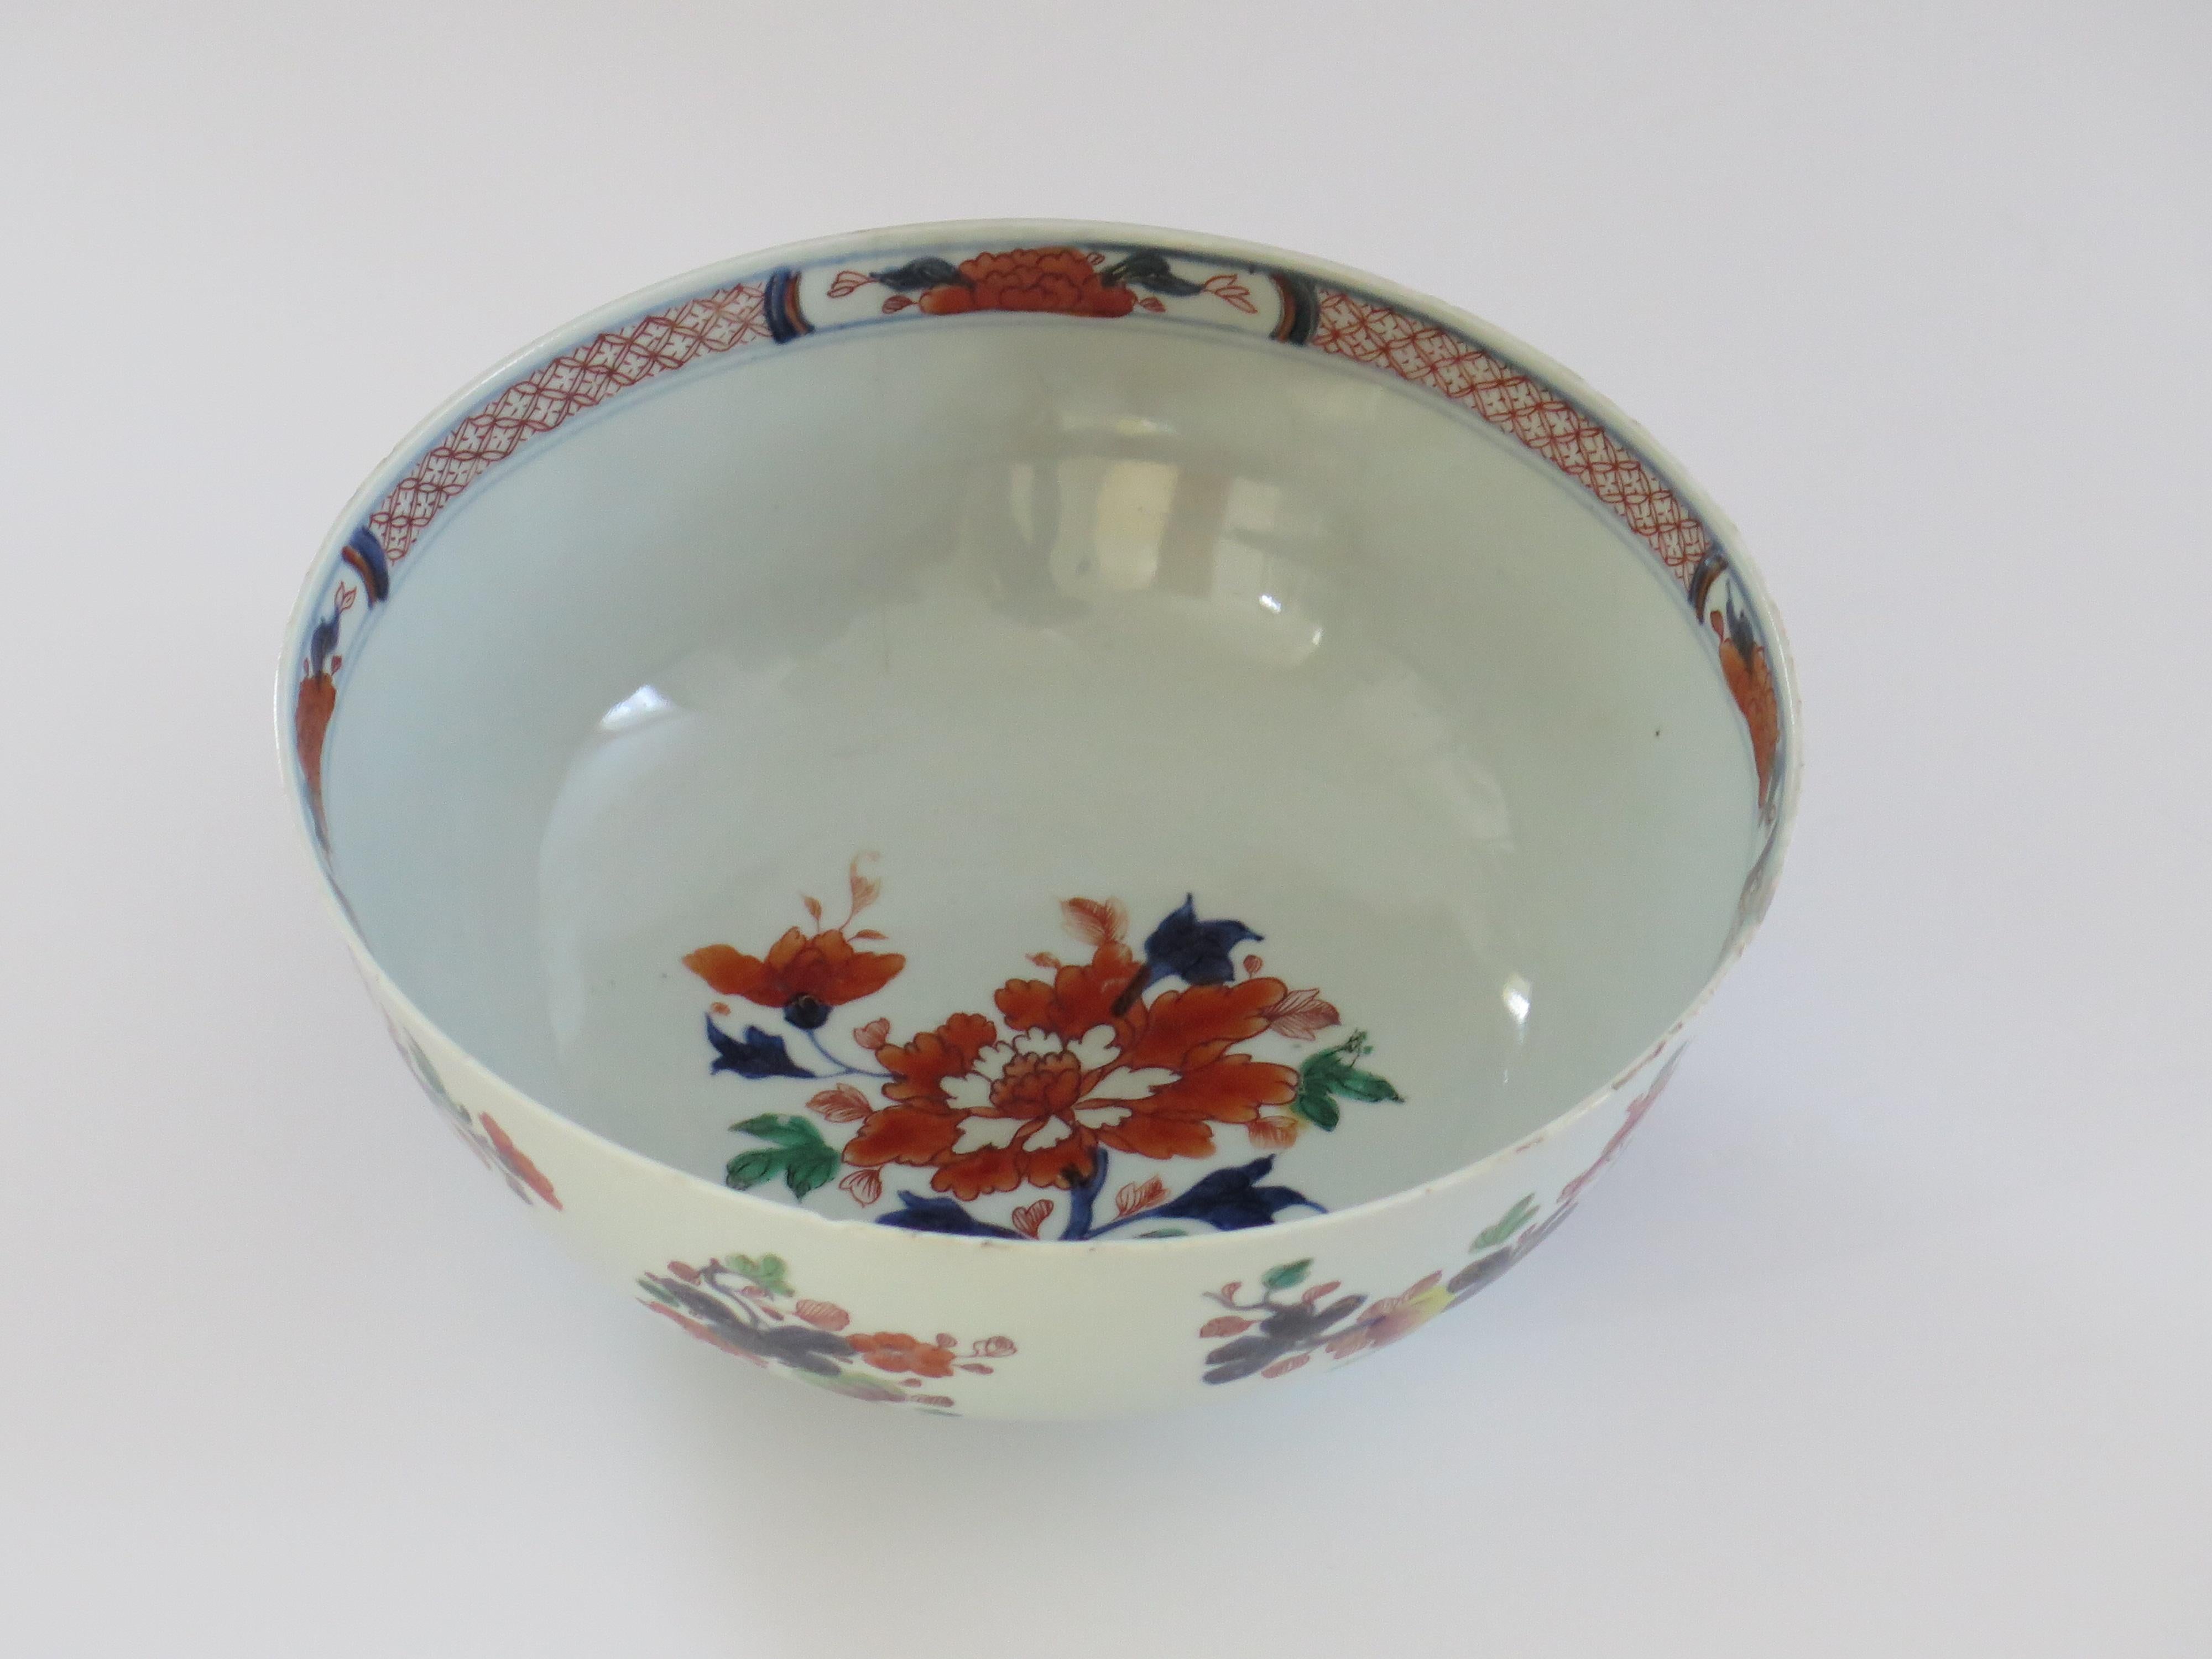 This is a beautifully hand painted large Chinese export bowl from the mid 18th century, Qing dynasty, Qianlong period, 1736-1795. We date this piece to circa 1750.

The bowl is well potted on mid height foot, all made from a very white